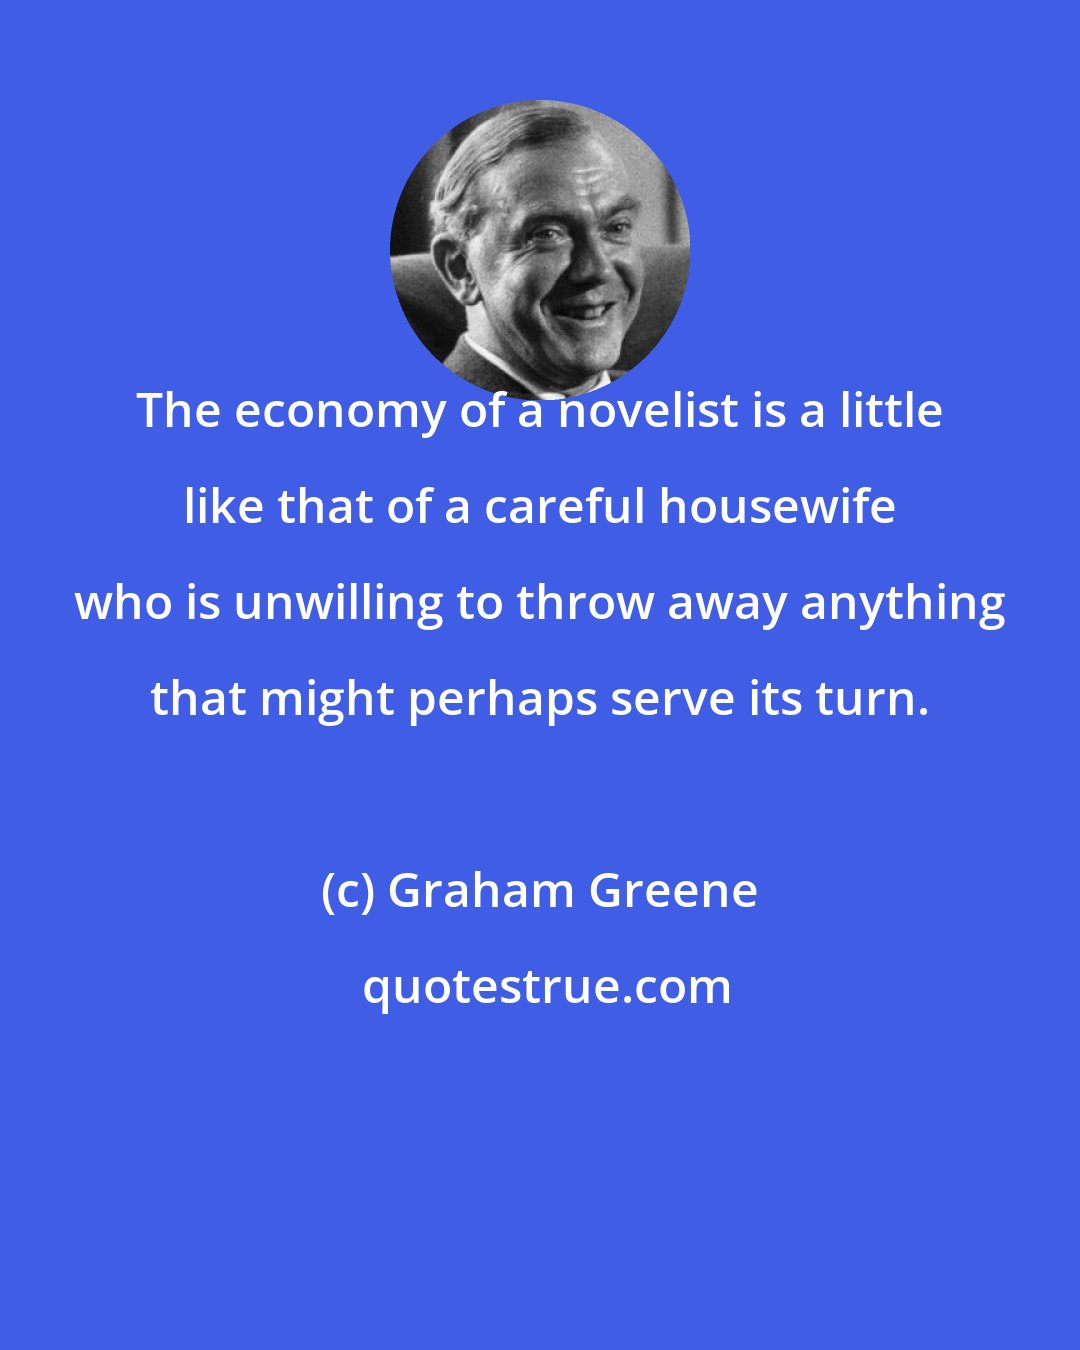 Graham Greene: The economy of a novelist is a little like that of a careful housewife who is unwilling to throw away anything that might perhaps serve its turn.